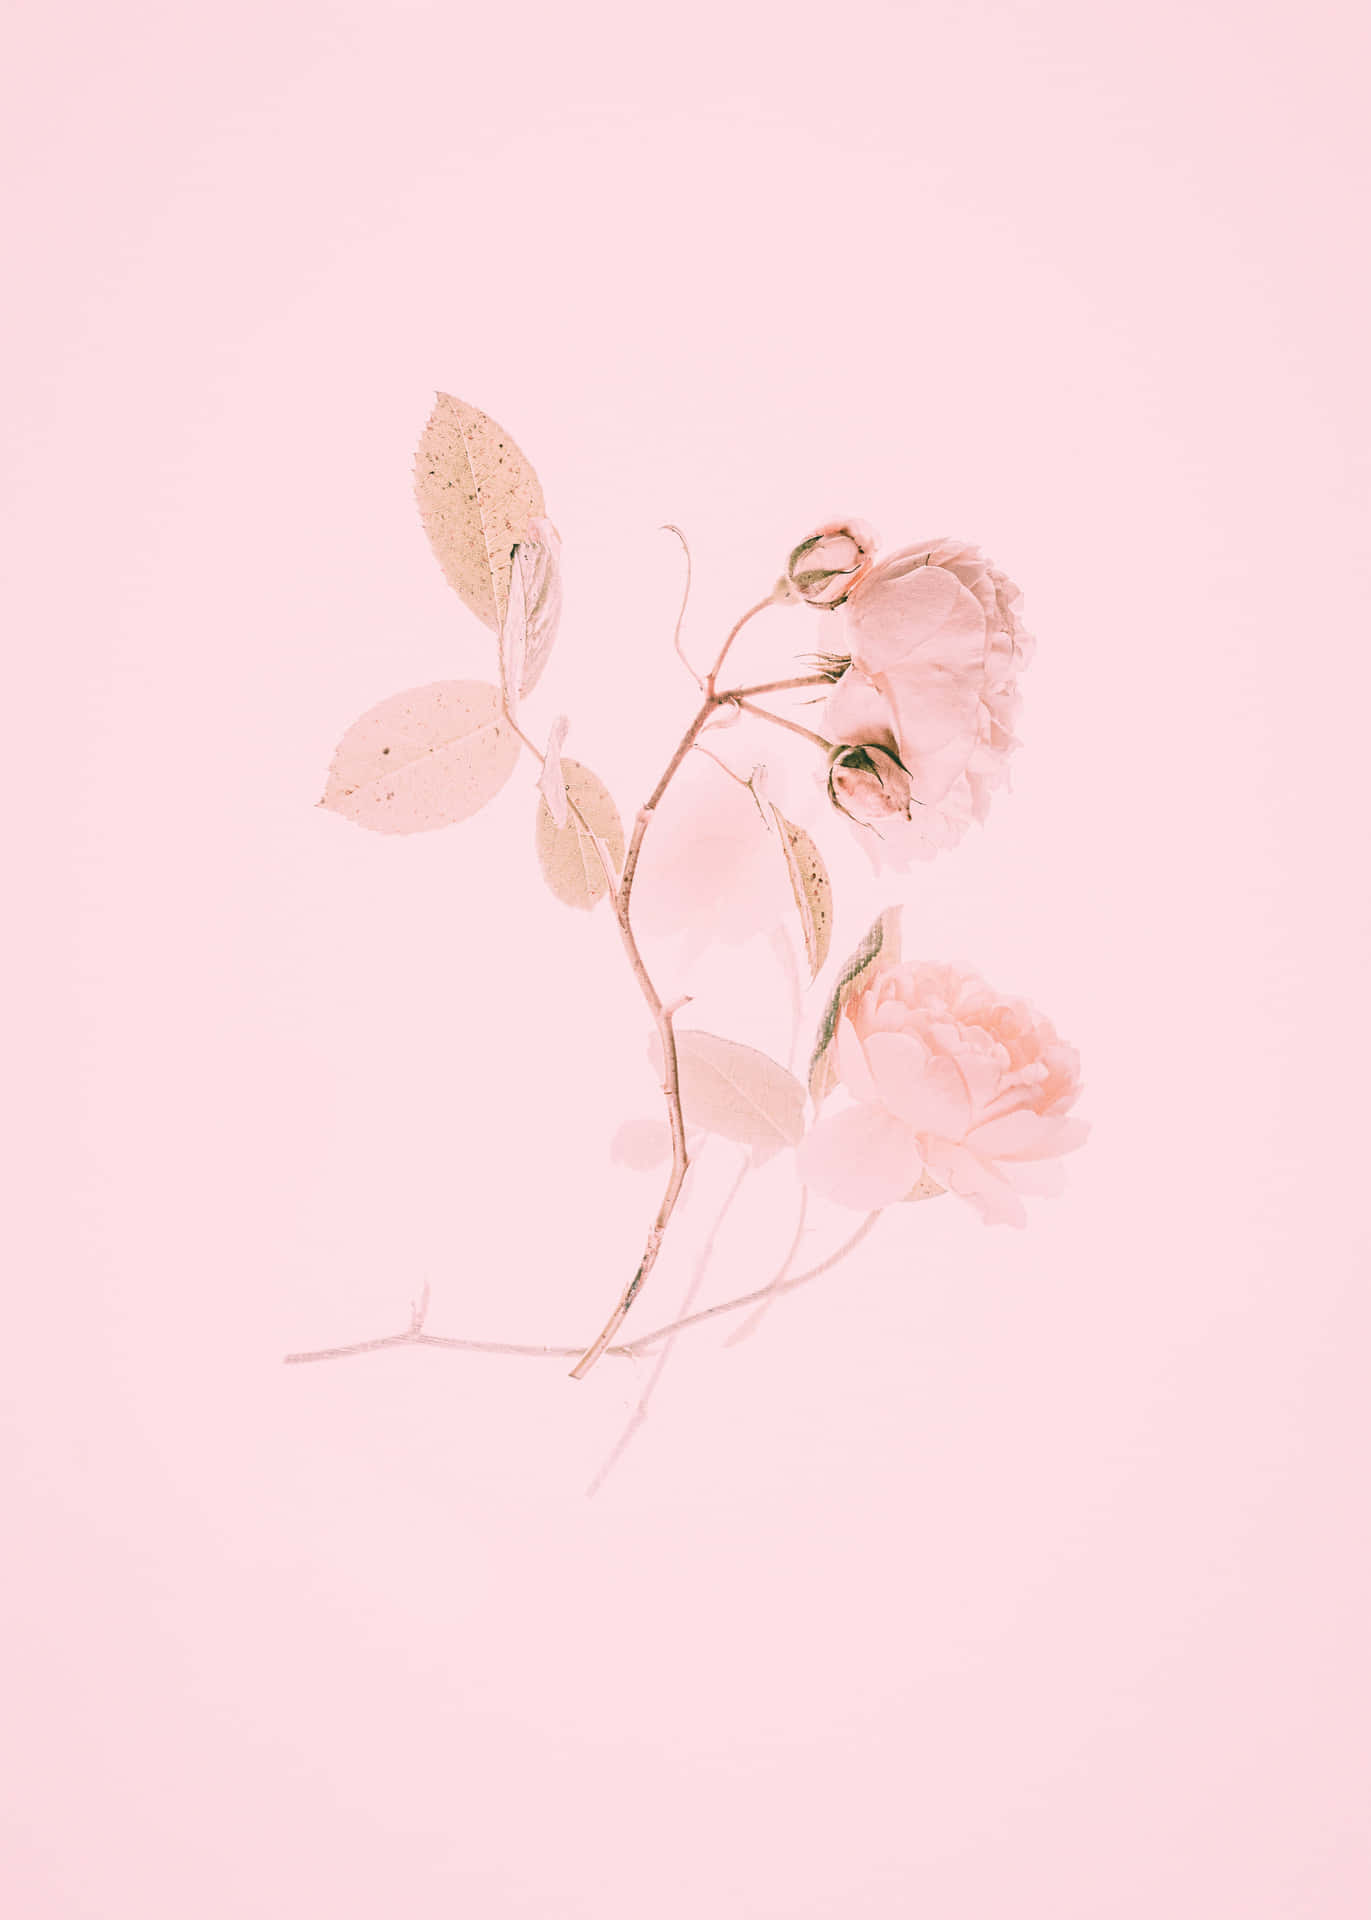 Soft Pink background with pleasant gradients.